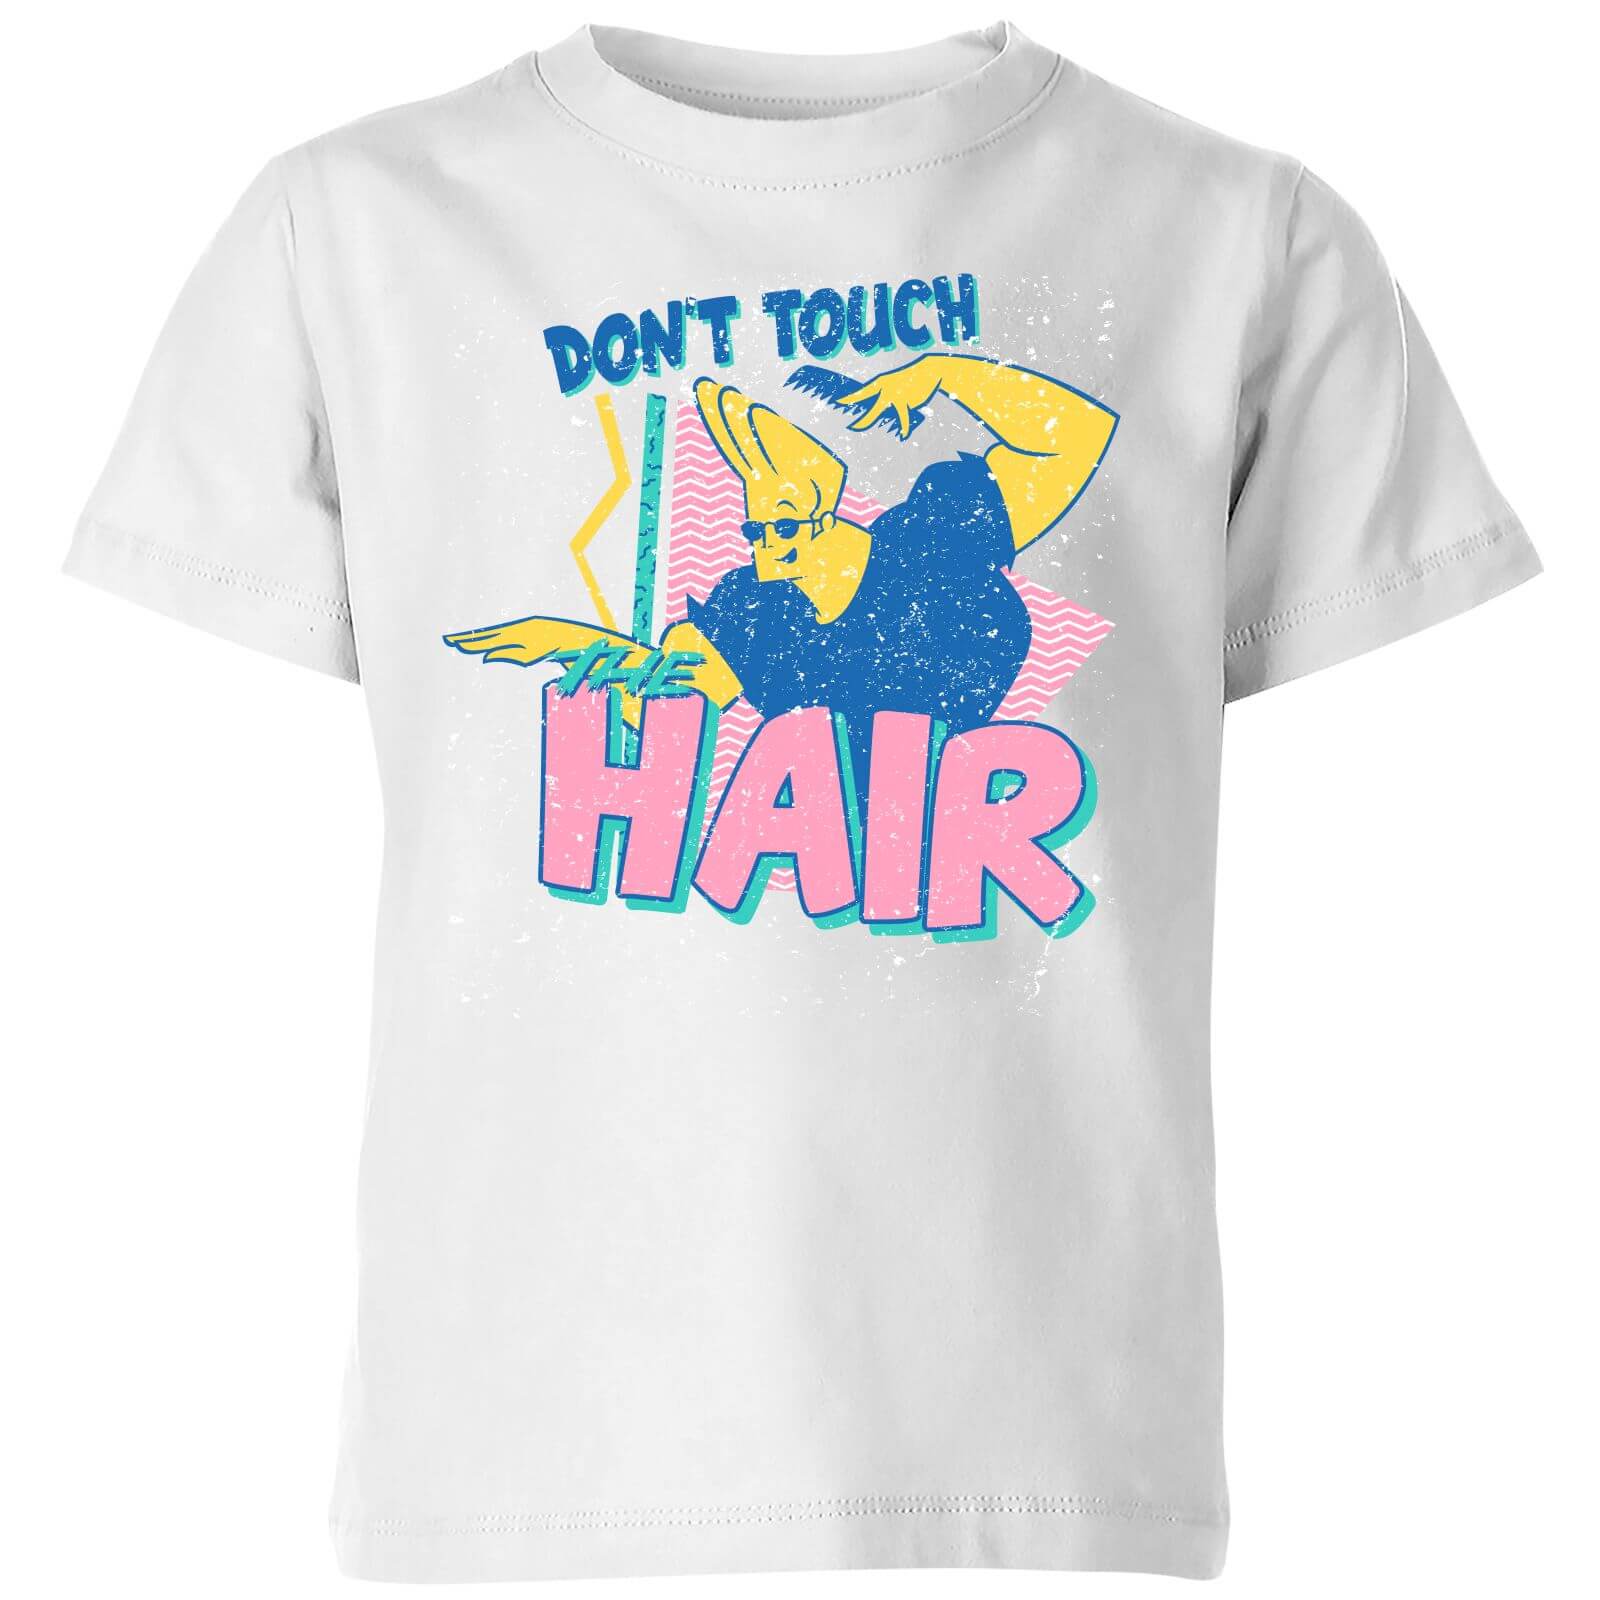 Cartoon Network Spin-Off Johnny Bravo Don't Touch The Hair Kids' T-Shirt - White - 5-6 Years - White